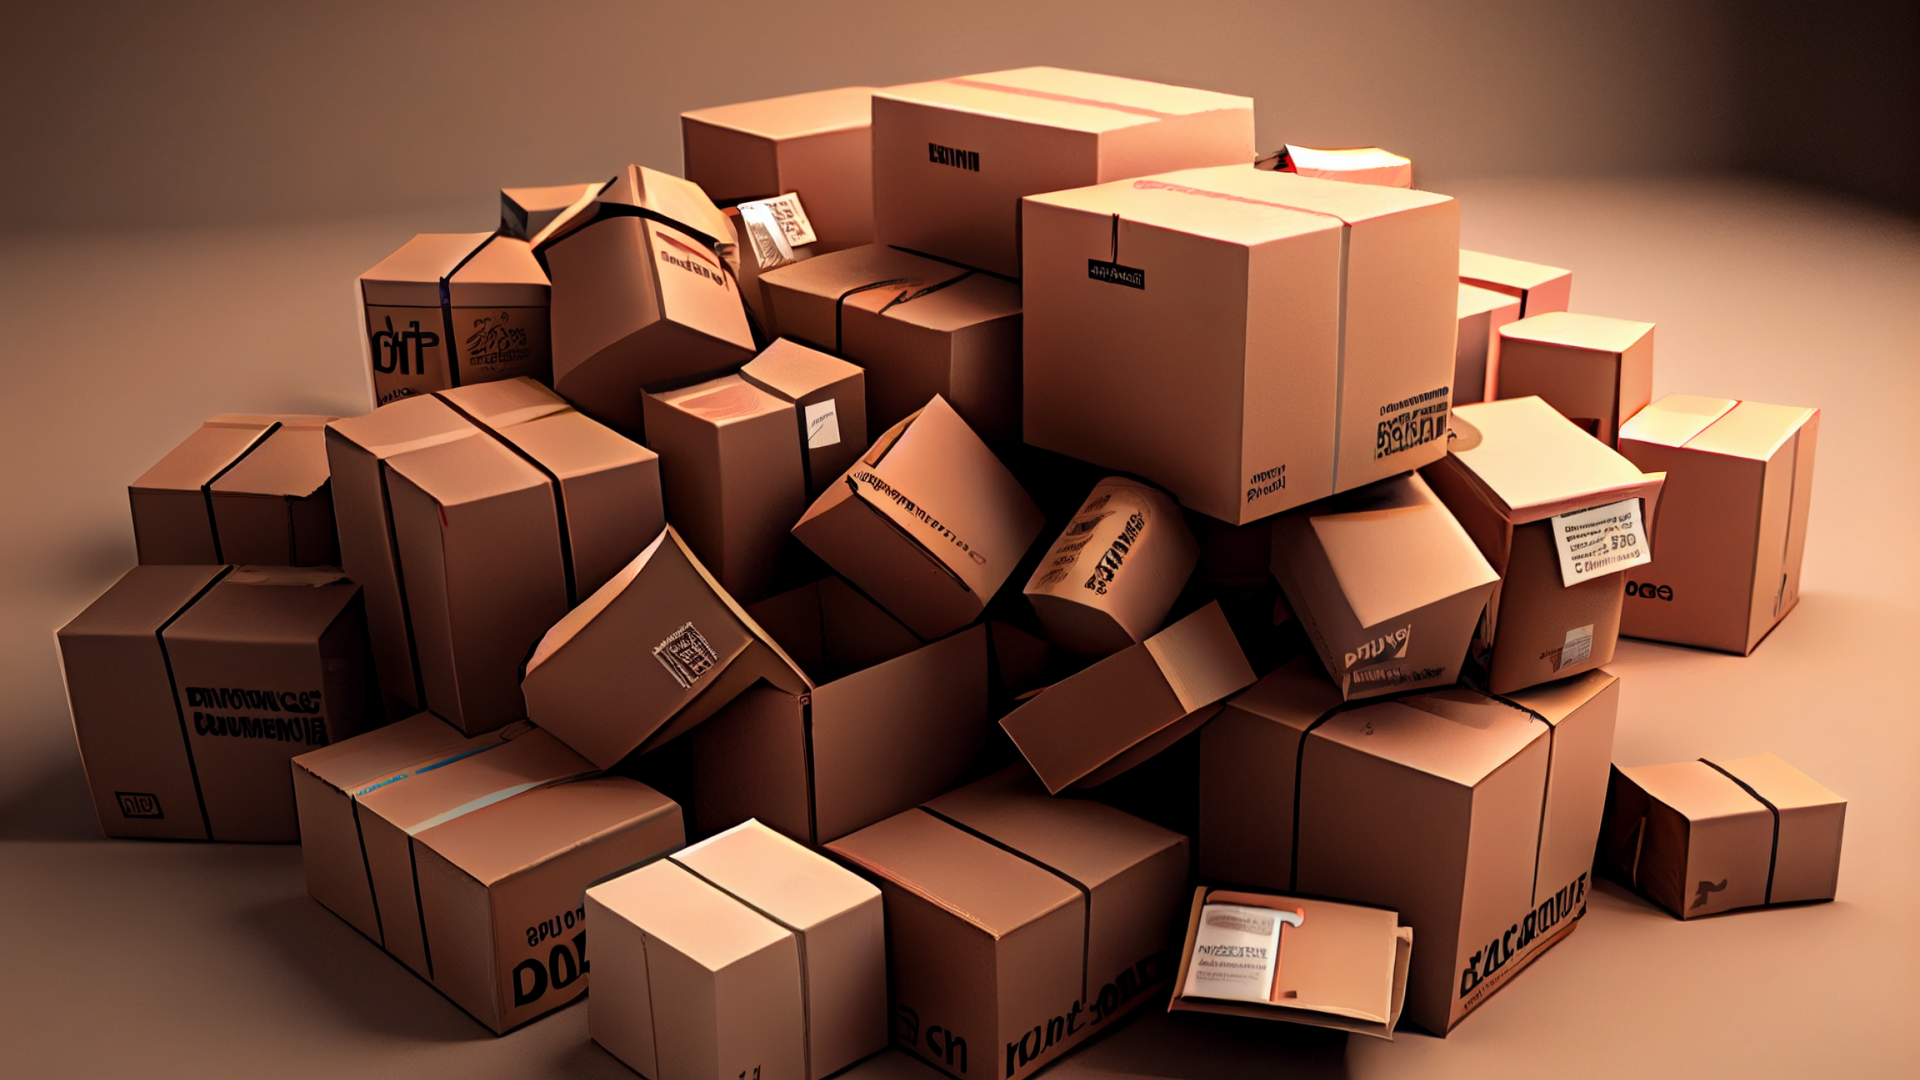 Pile of boxes representing ecommerce and Amazon